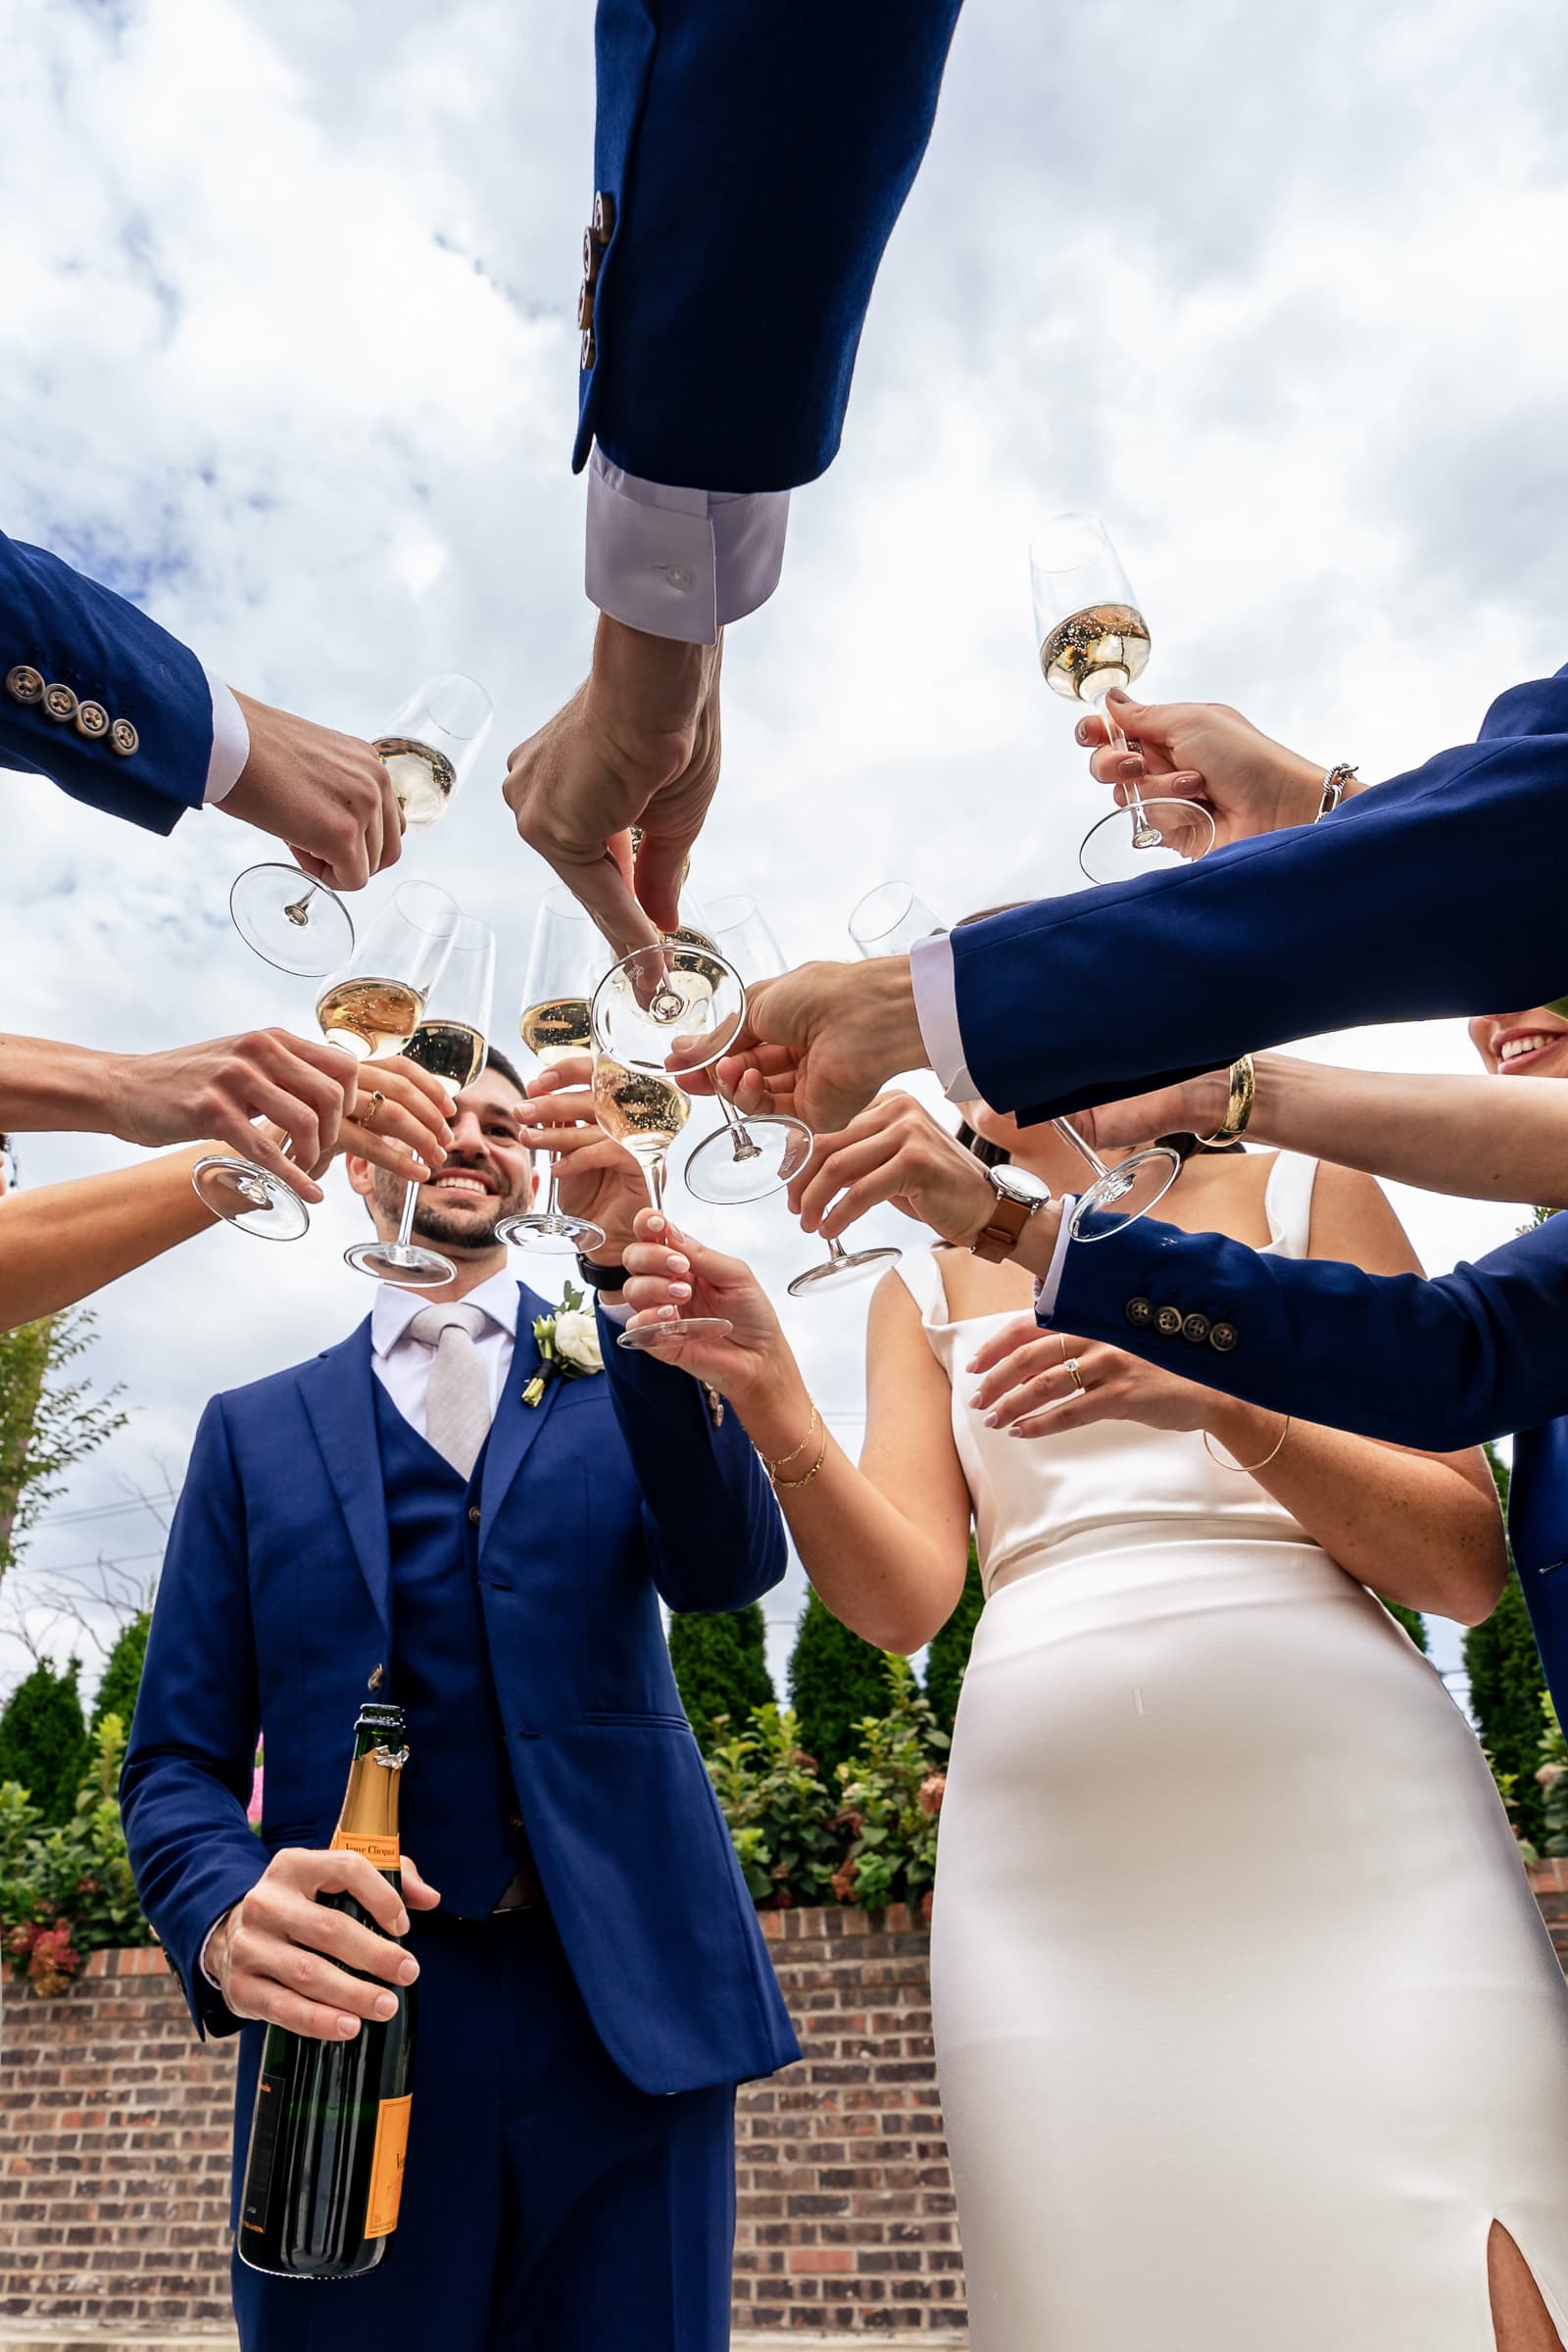 bride and groom share a champagne toast w/ their wedding party | photos by Kivus & Camera